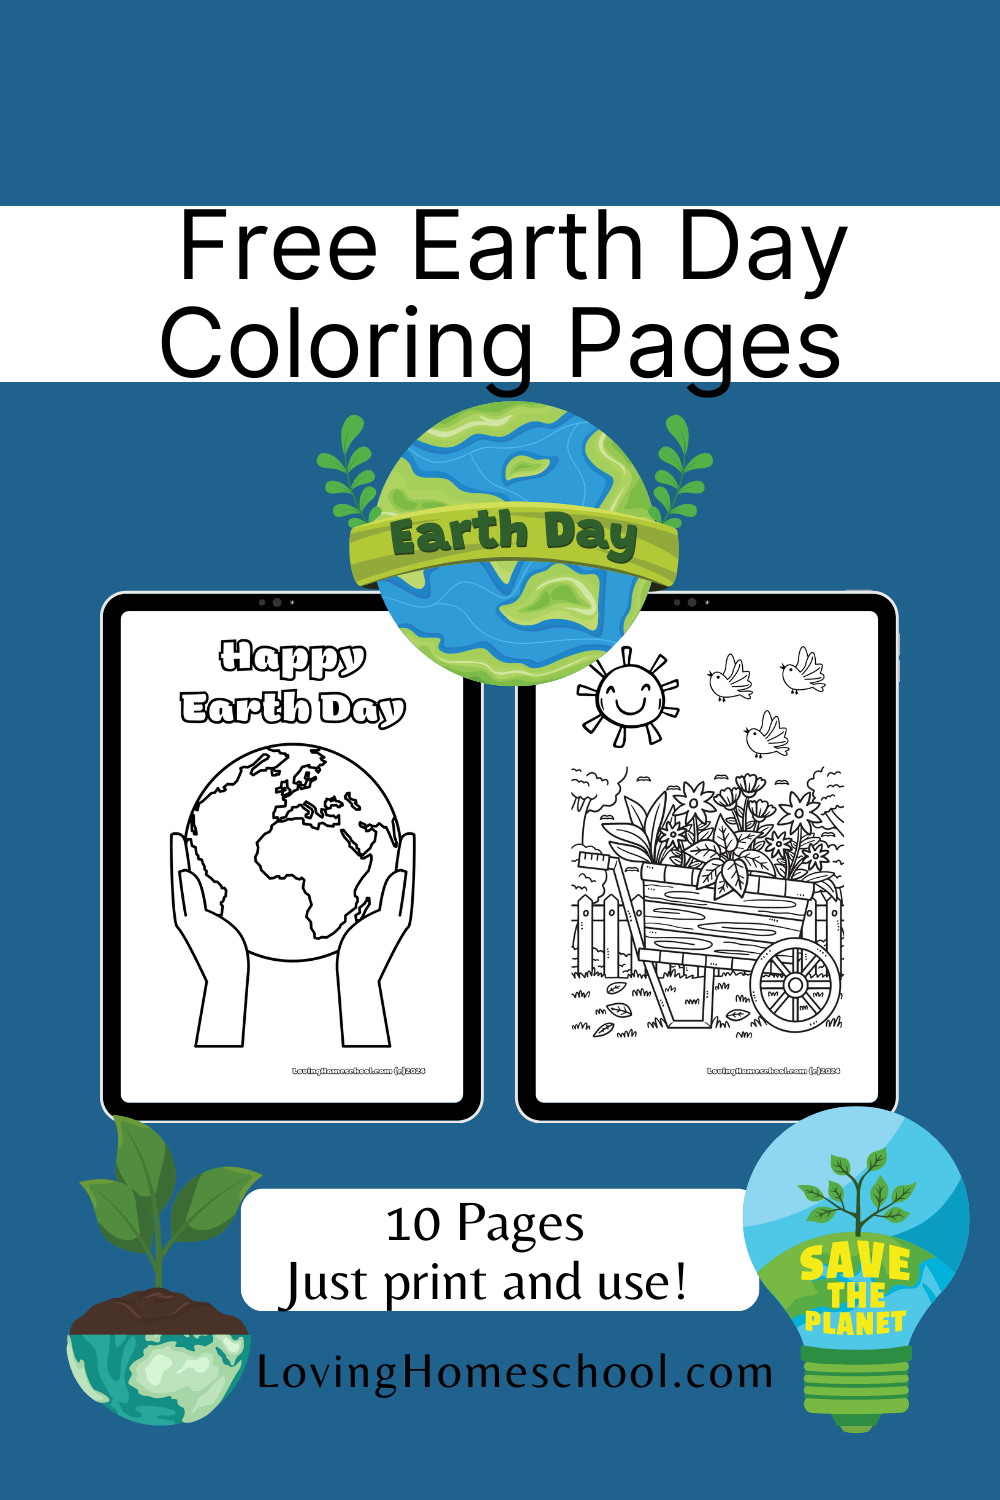 Earth Day Coloring Pages Pinterest Pin